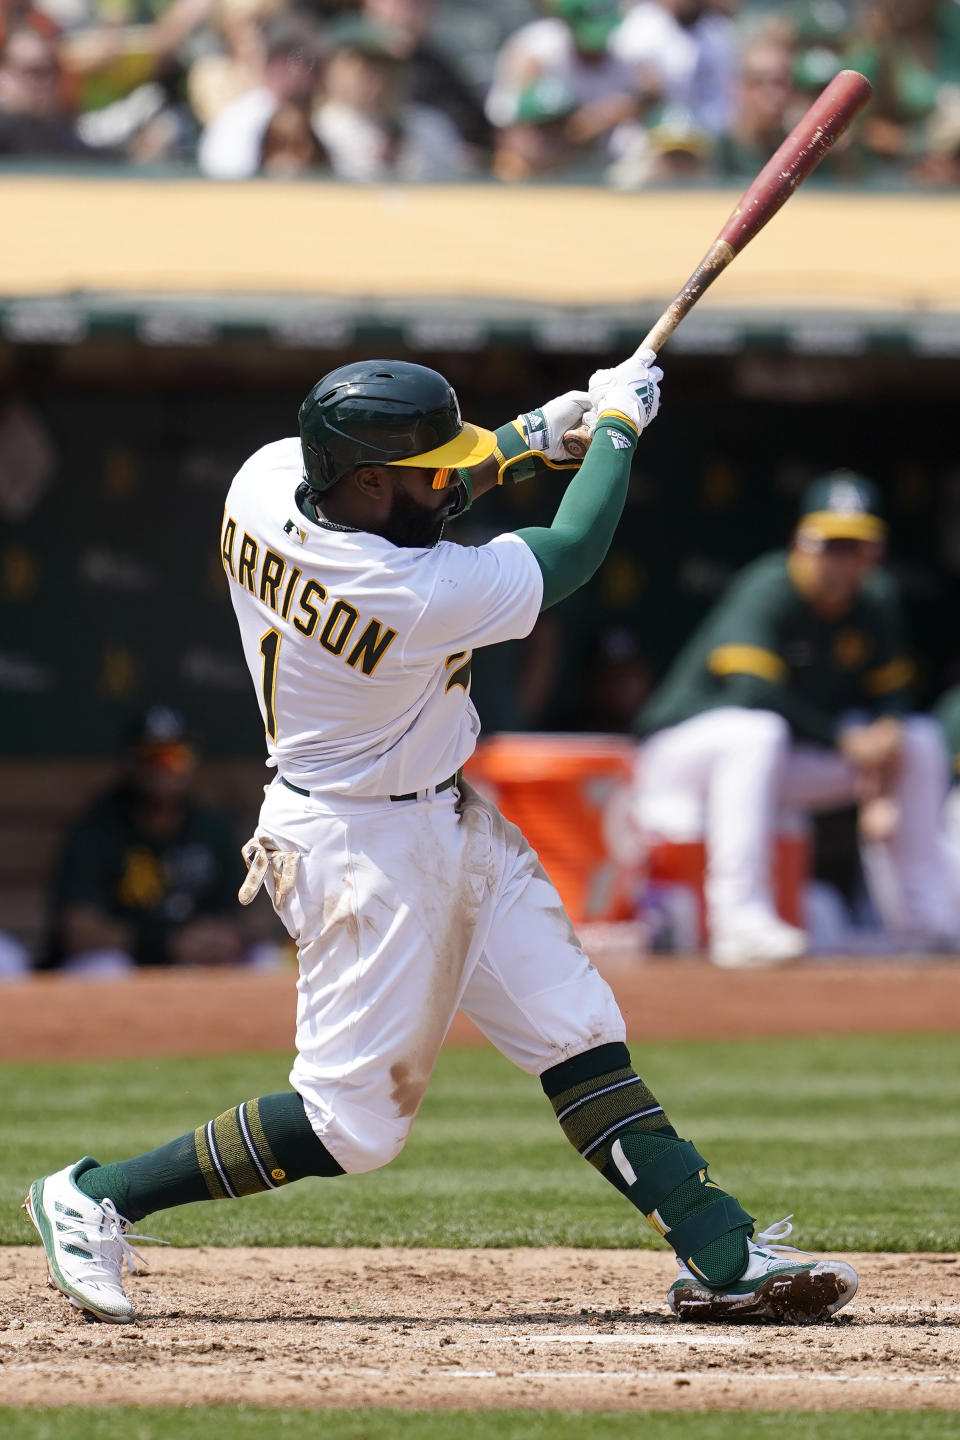 Oakland Athletics' Josh Harrison hits an RBI-double against the San Francisco Giants during the third inning of a baseball game in Oakland, Calif., Saturday, Aug. 21, 2021. (AP Photo/Jeff Chiu)